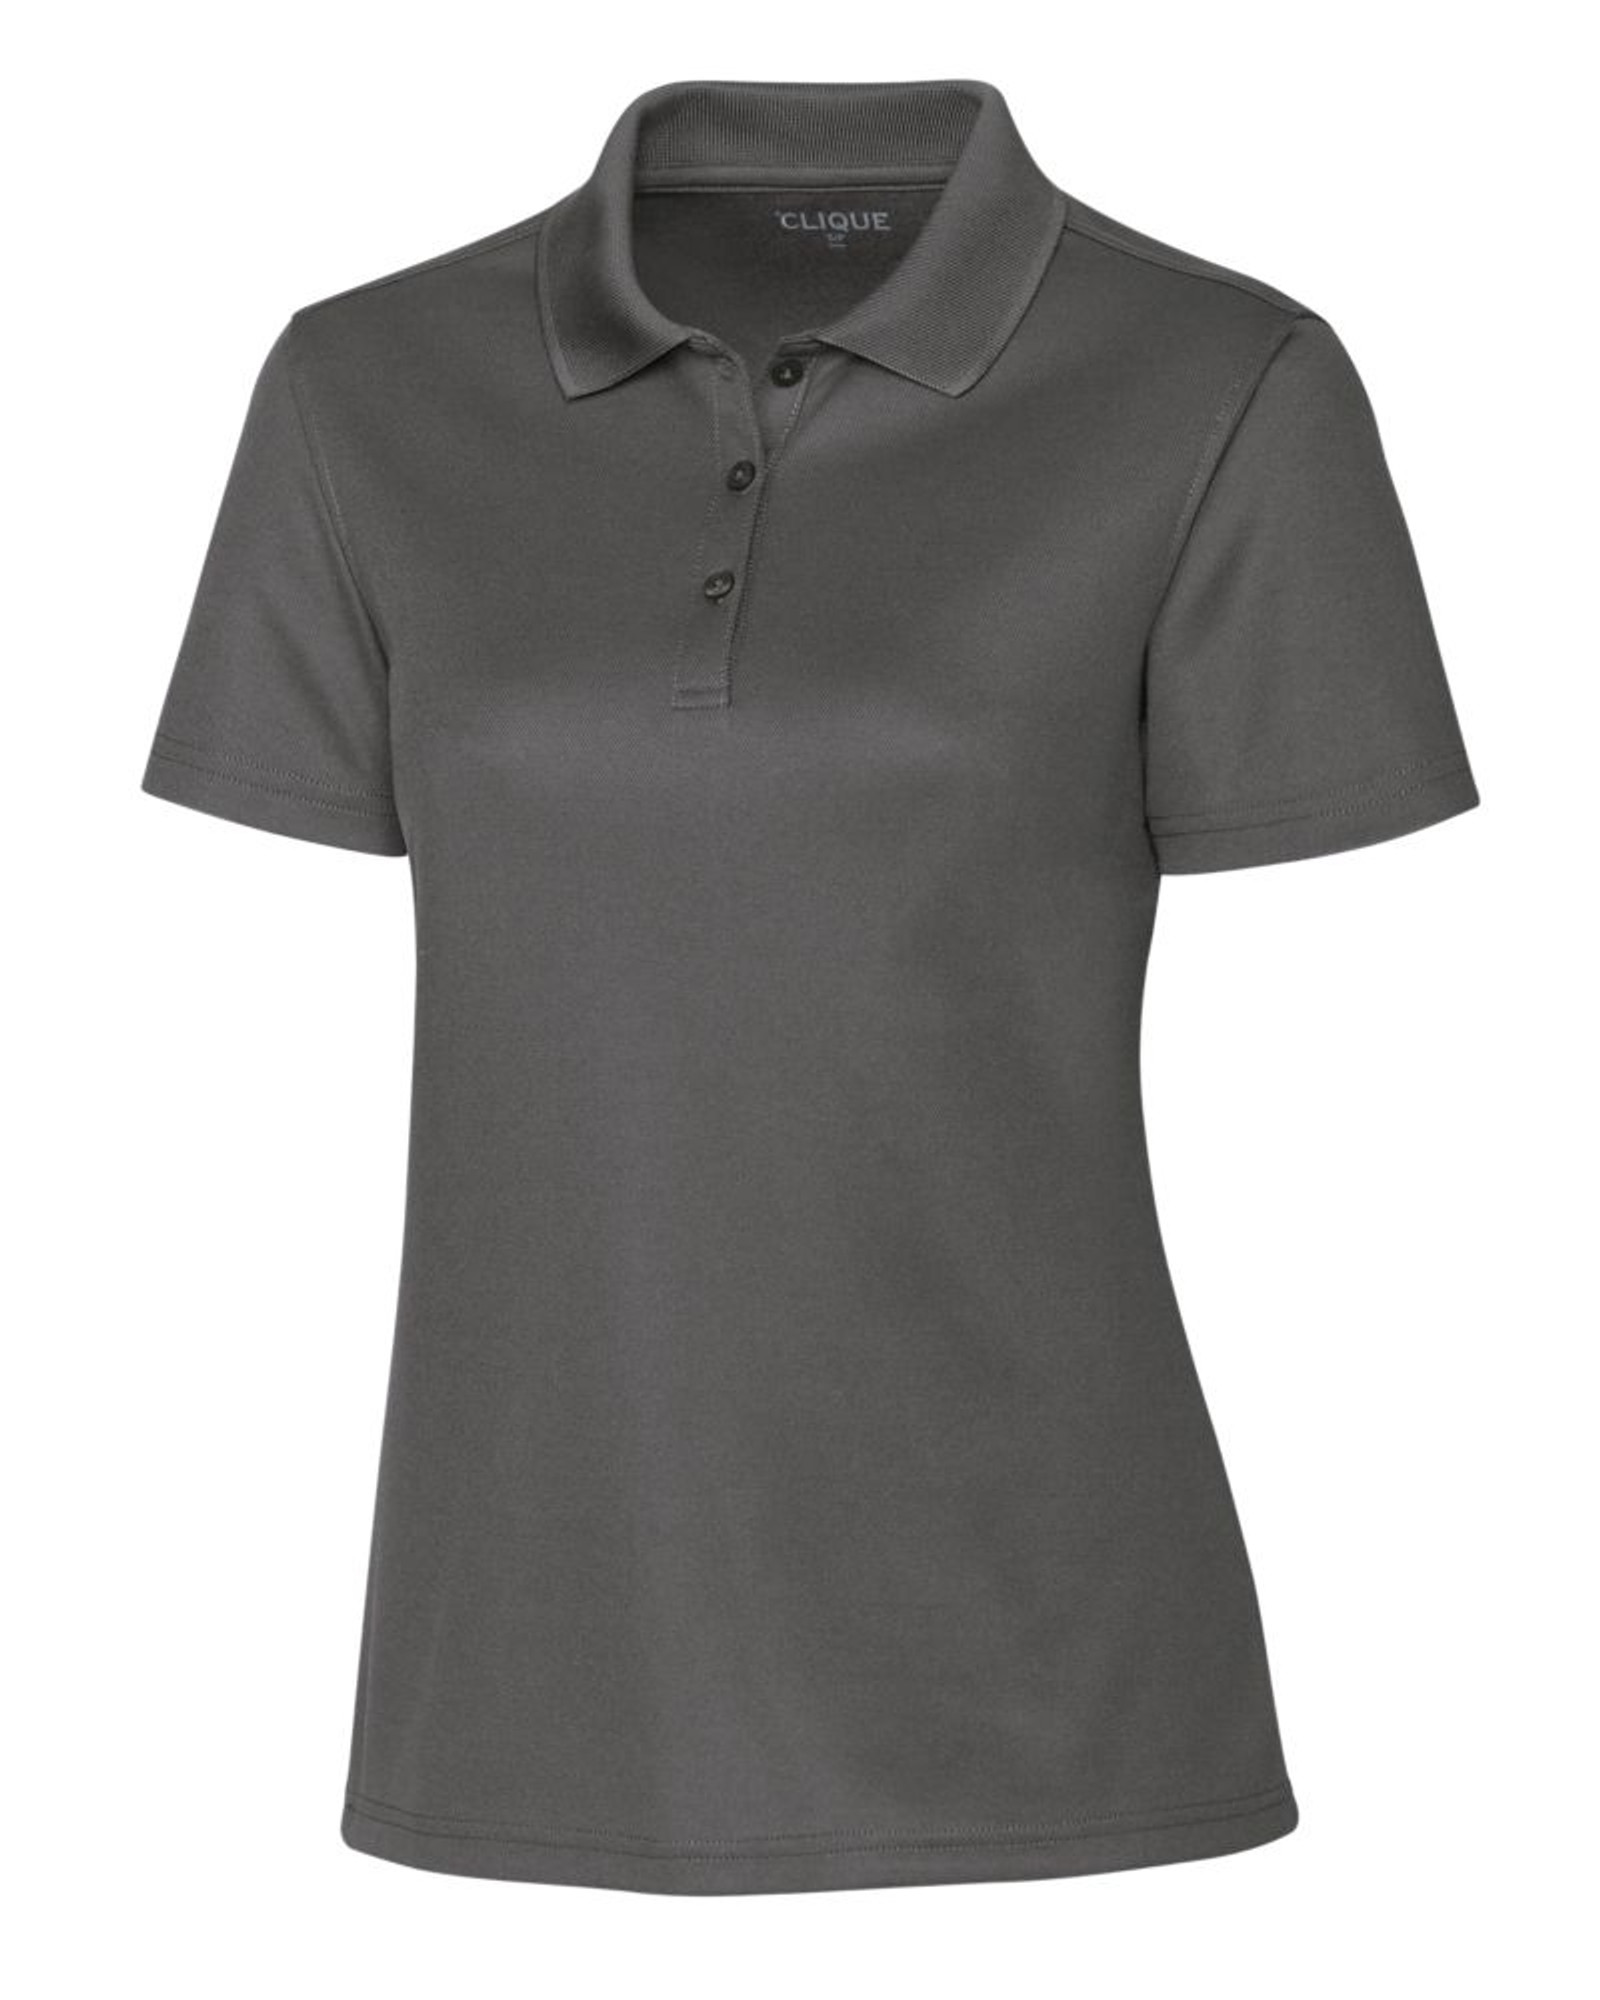 Clique Spin Eco Performance Pique Womens Polo | Cutter and Buck Canada